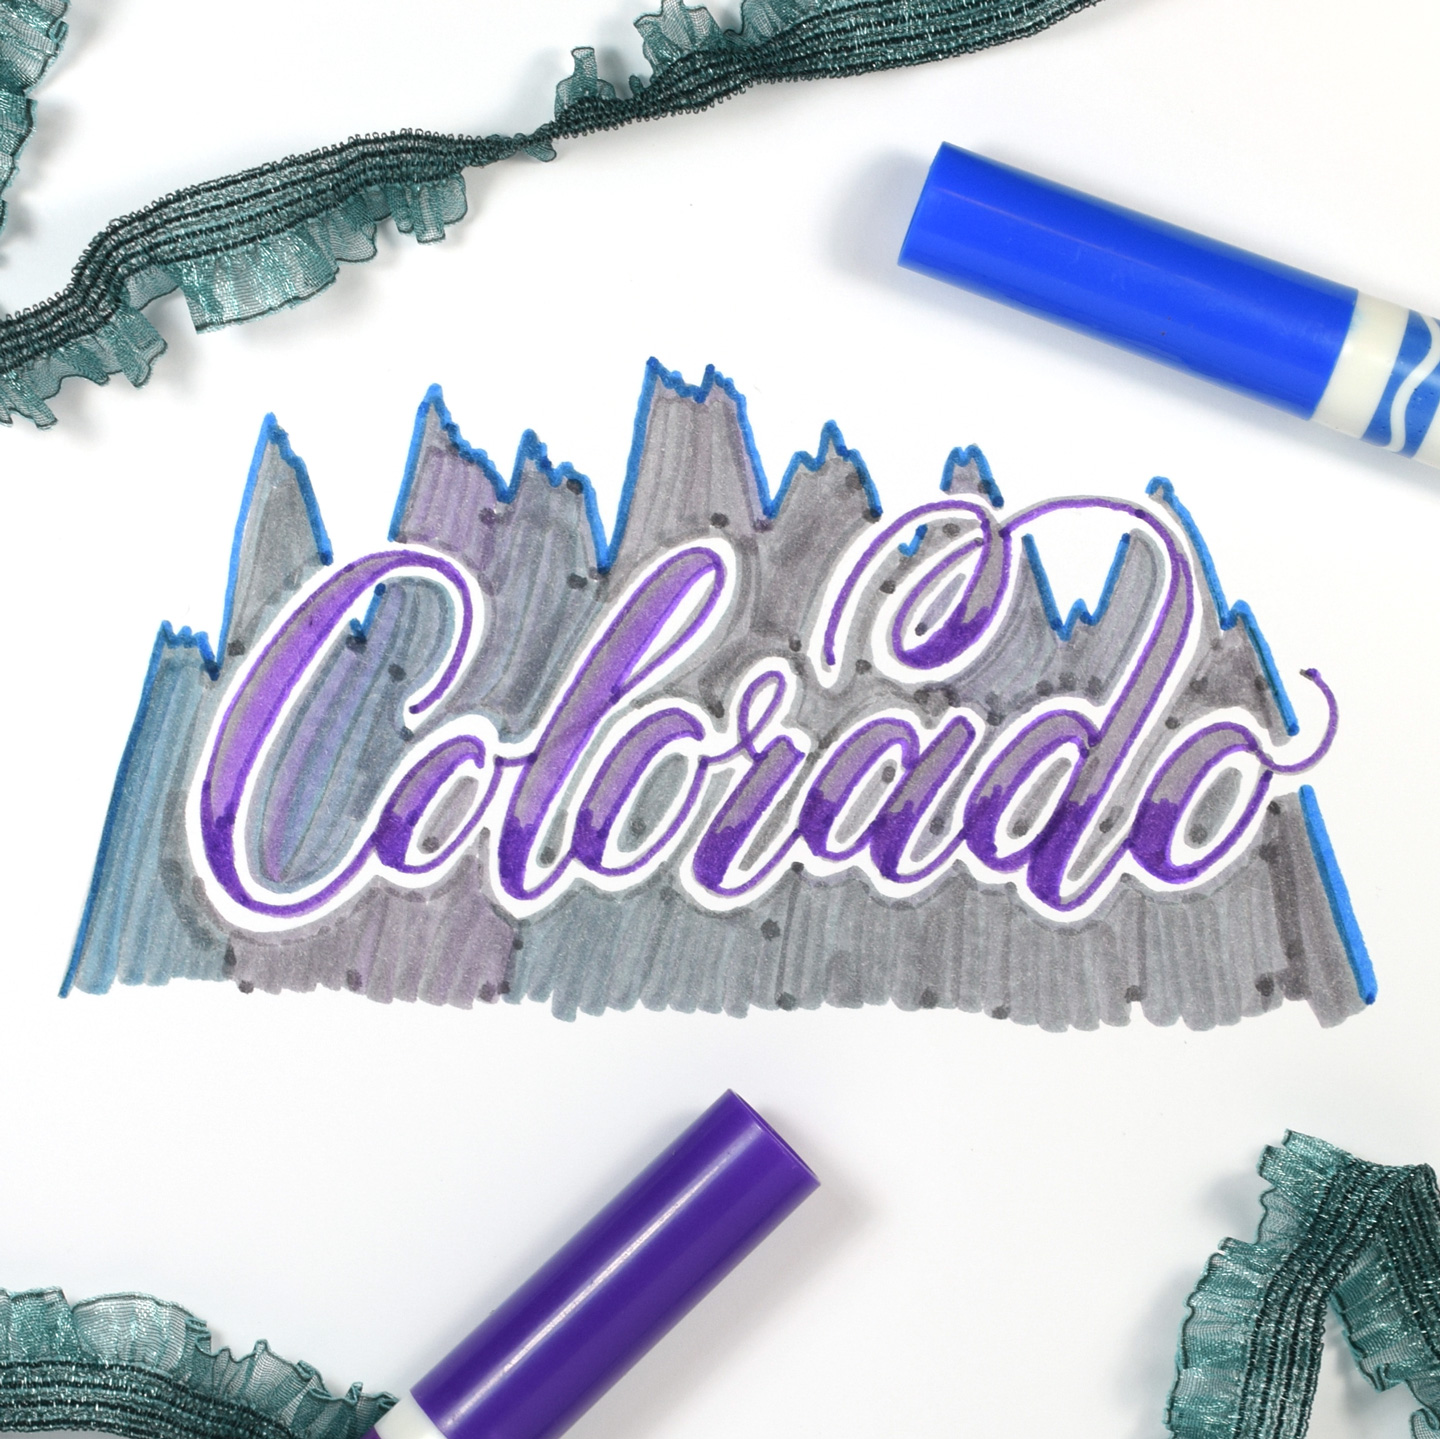 3 Quick “Crayola Calligraphy” Projects